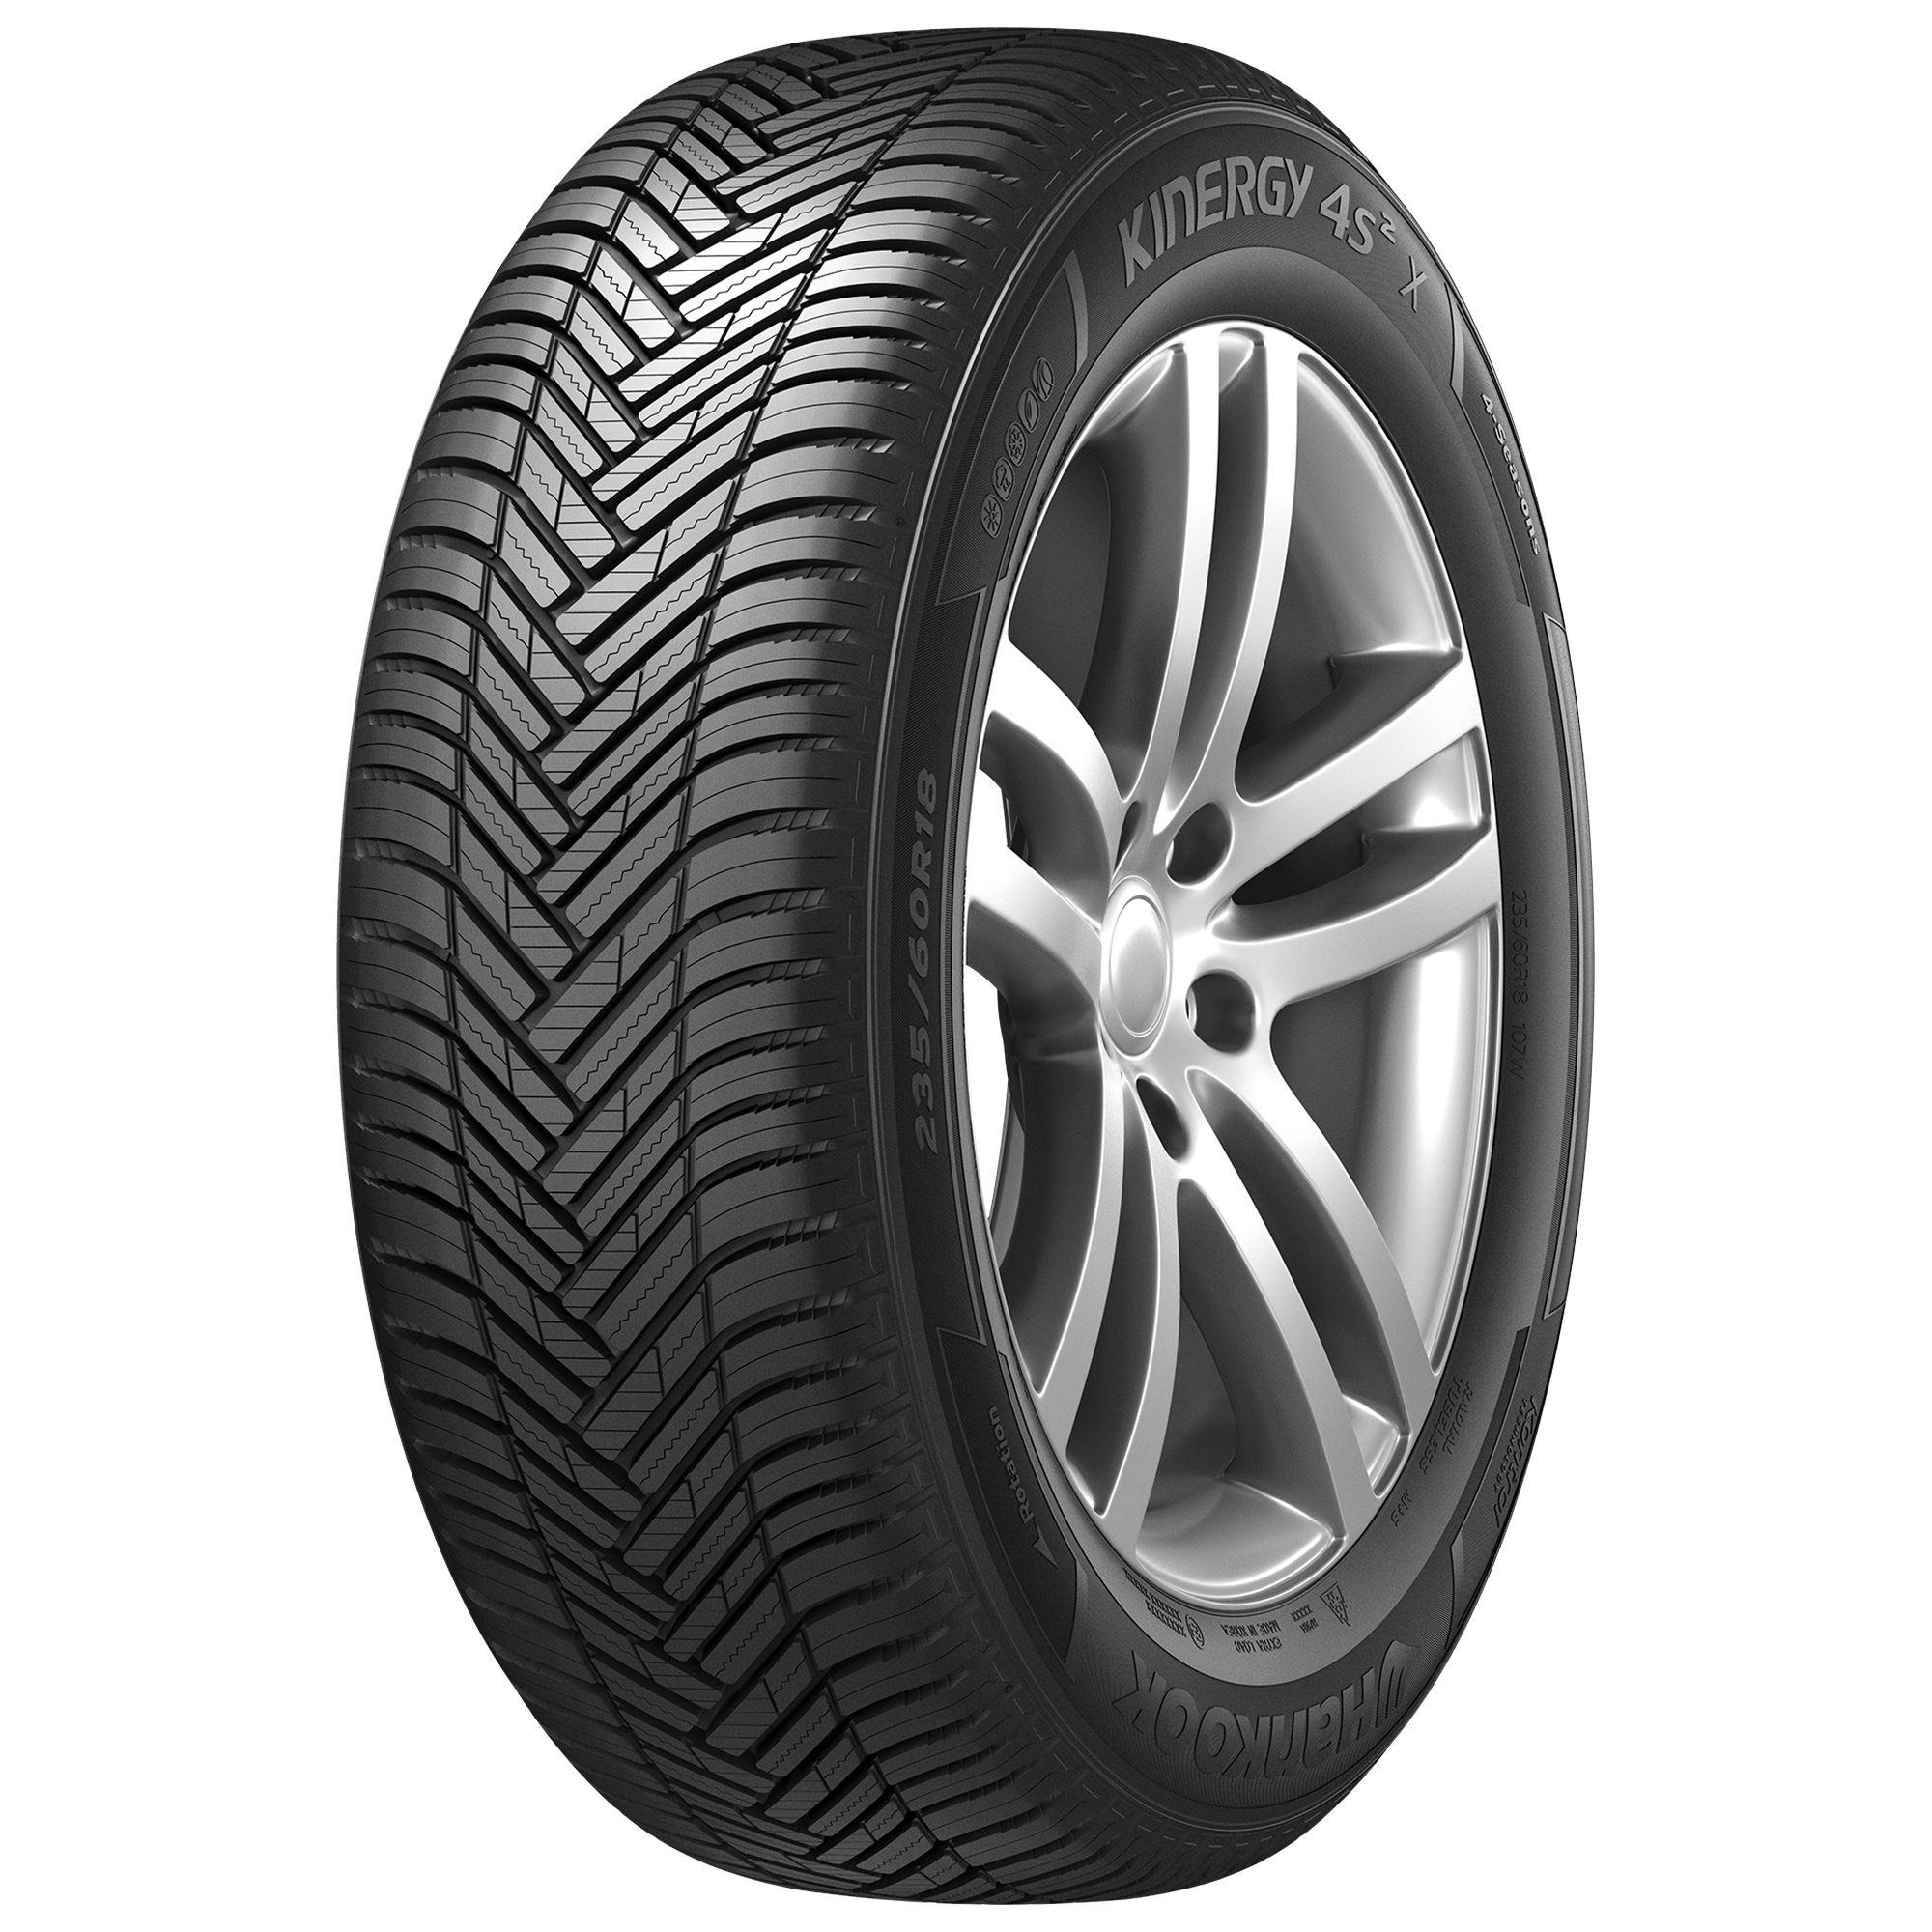 HANKOOK KINERGY 4S 2 X (H750A) 265/45ZR20 108Y BSW